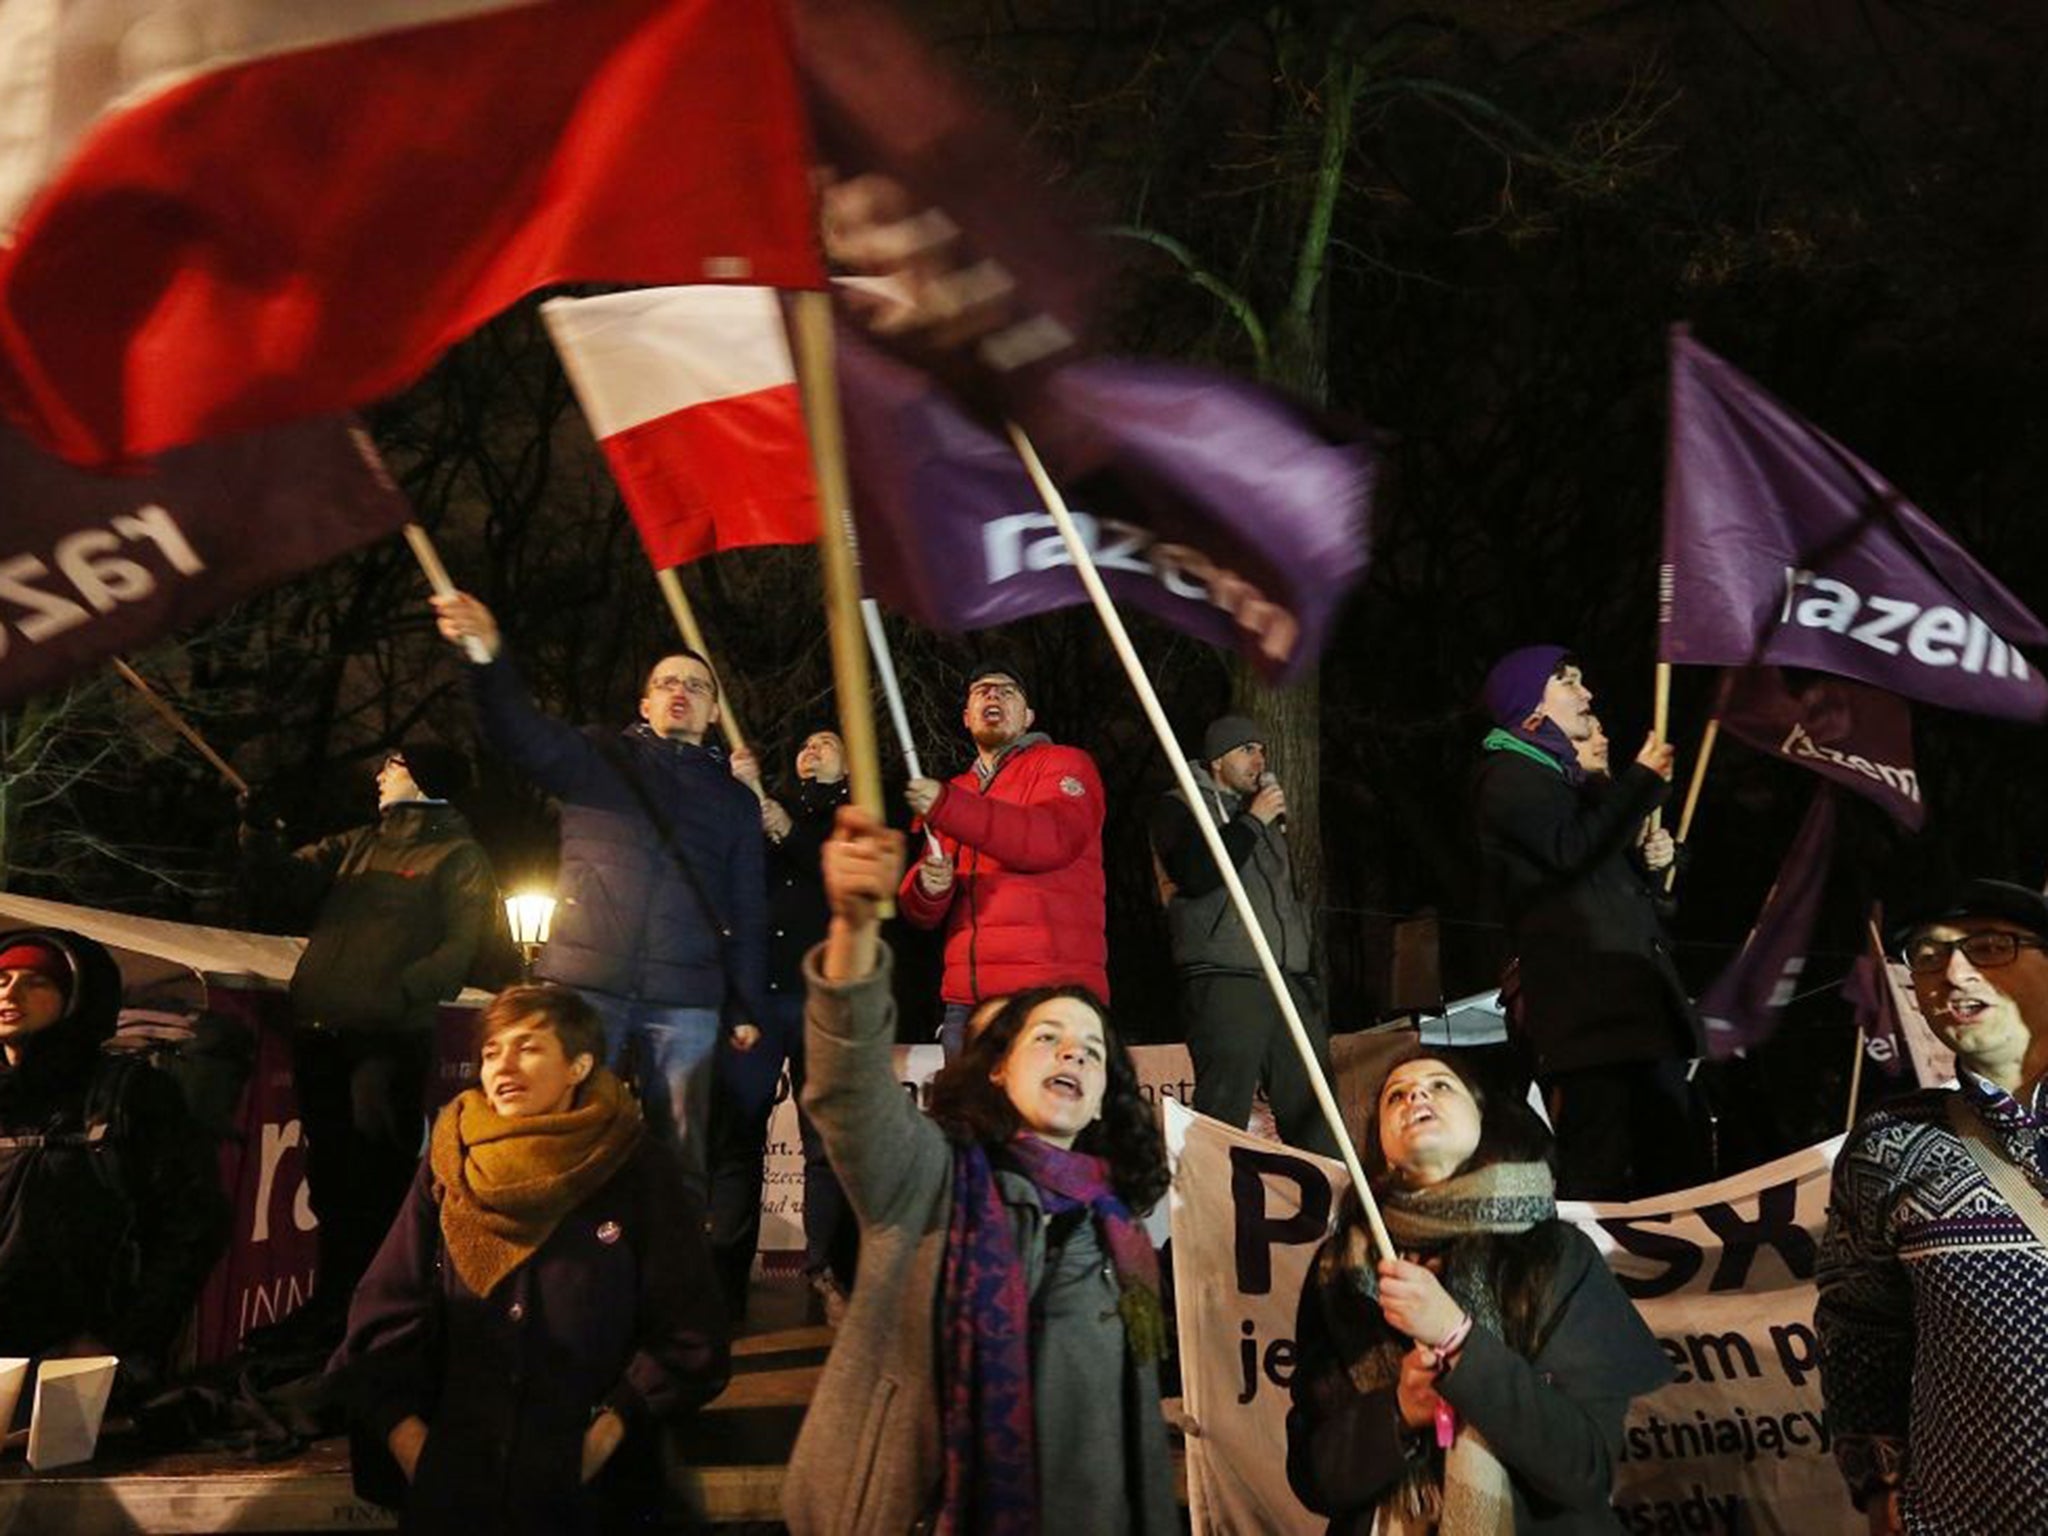 Protesters gather in Warsaw to oppose reforms that have been deemed illegal by Poland’s Constitutional Court